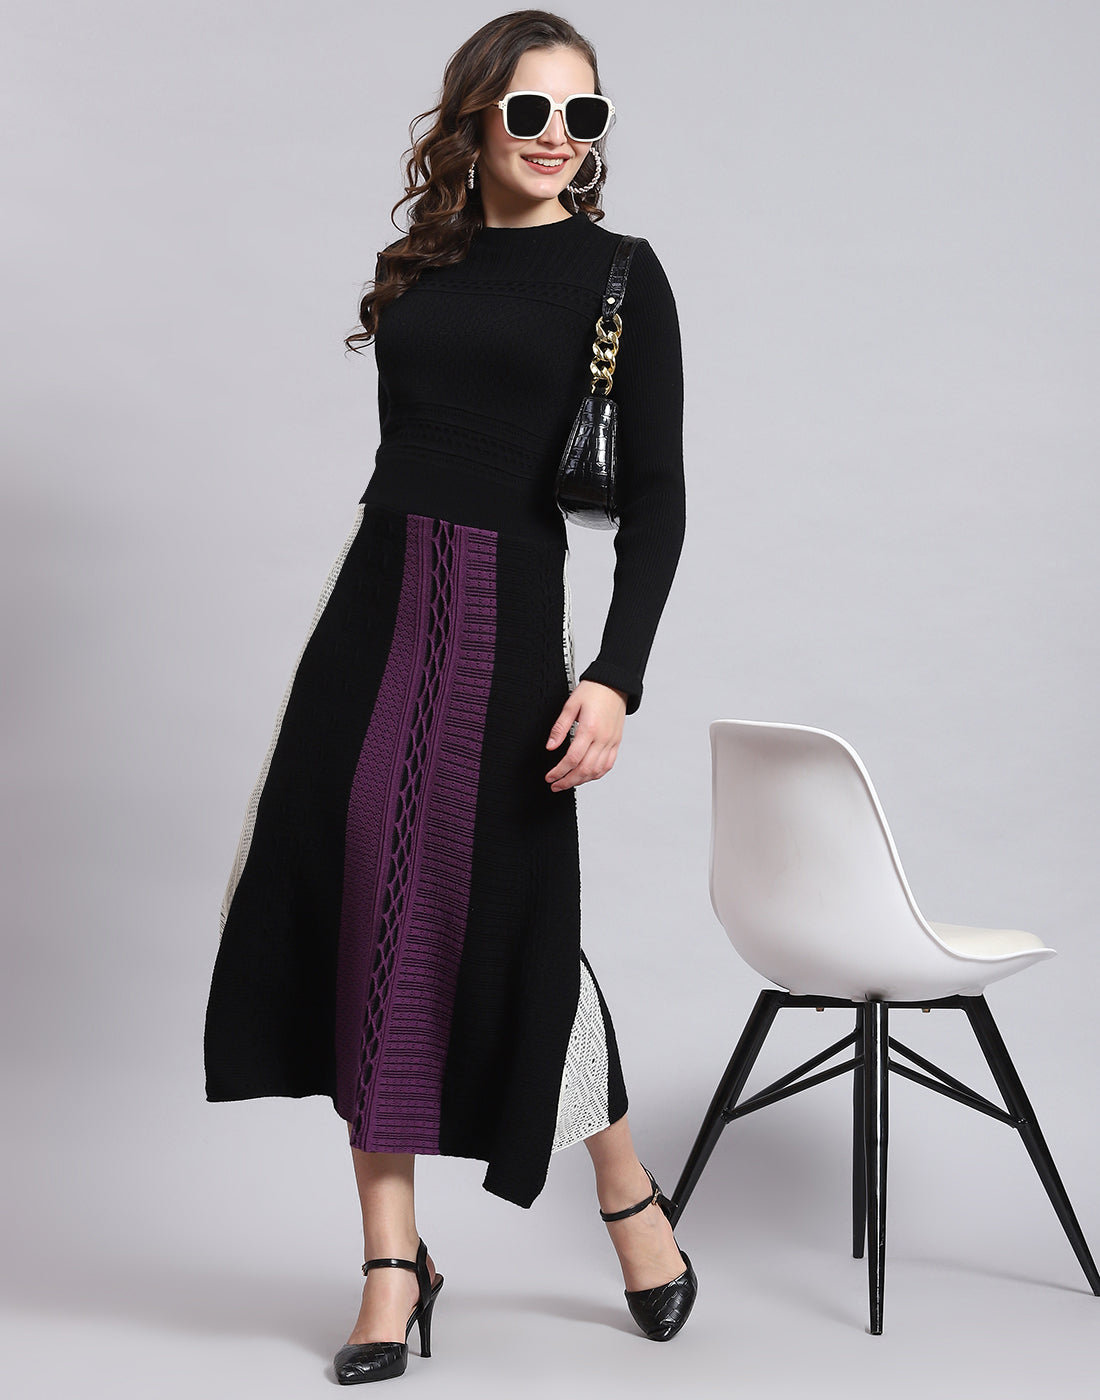 Top Skirt with Jacket Indo Western Party Wear Trendy Dress